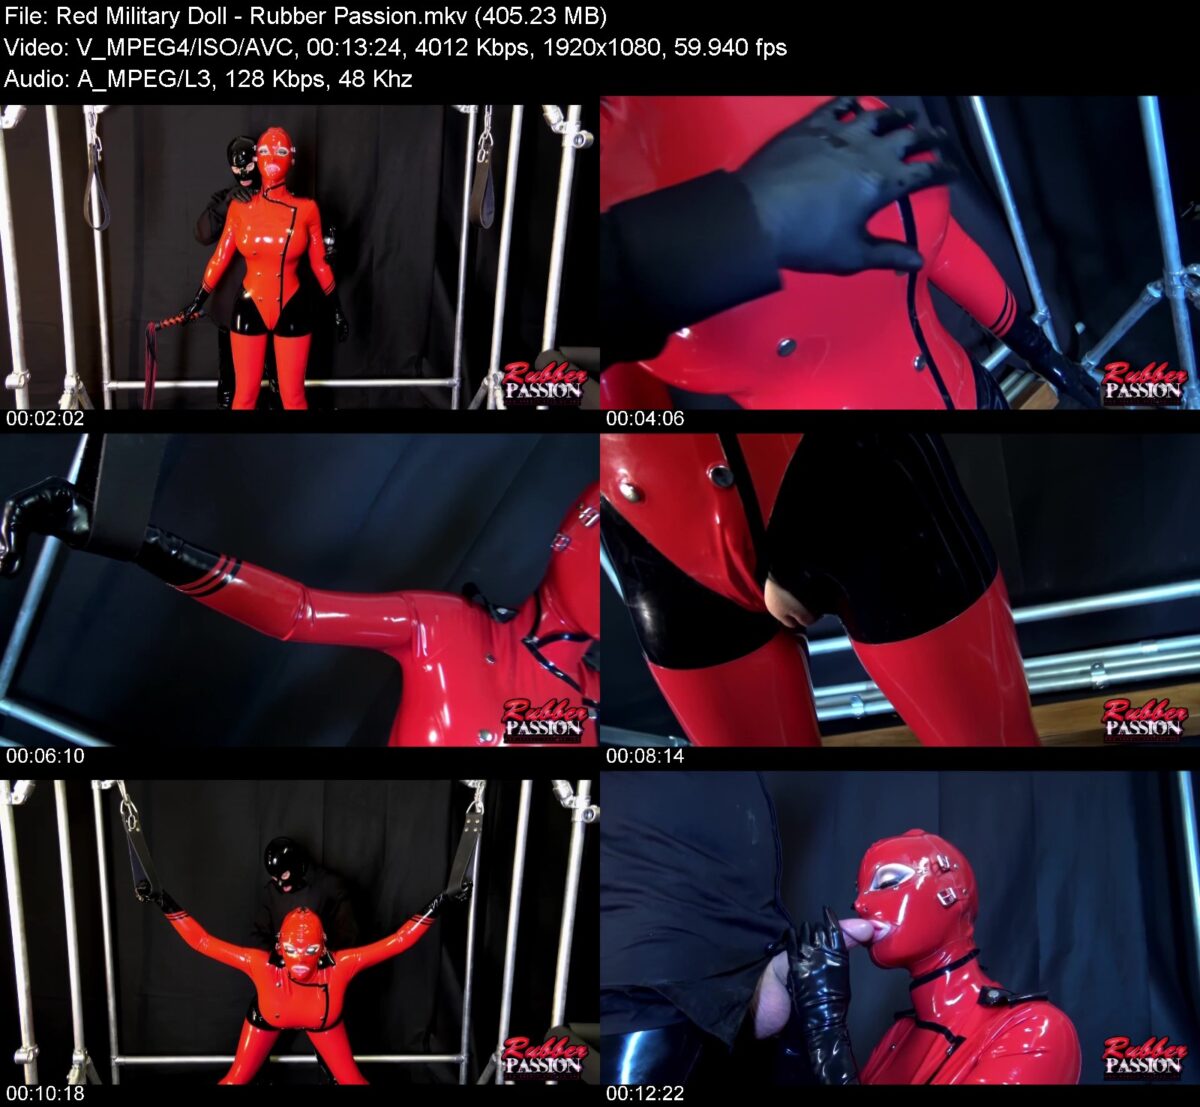 Red Military Doll in Rubber Passion